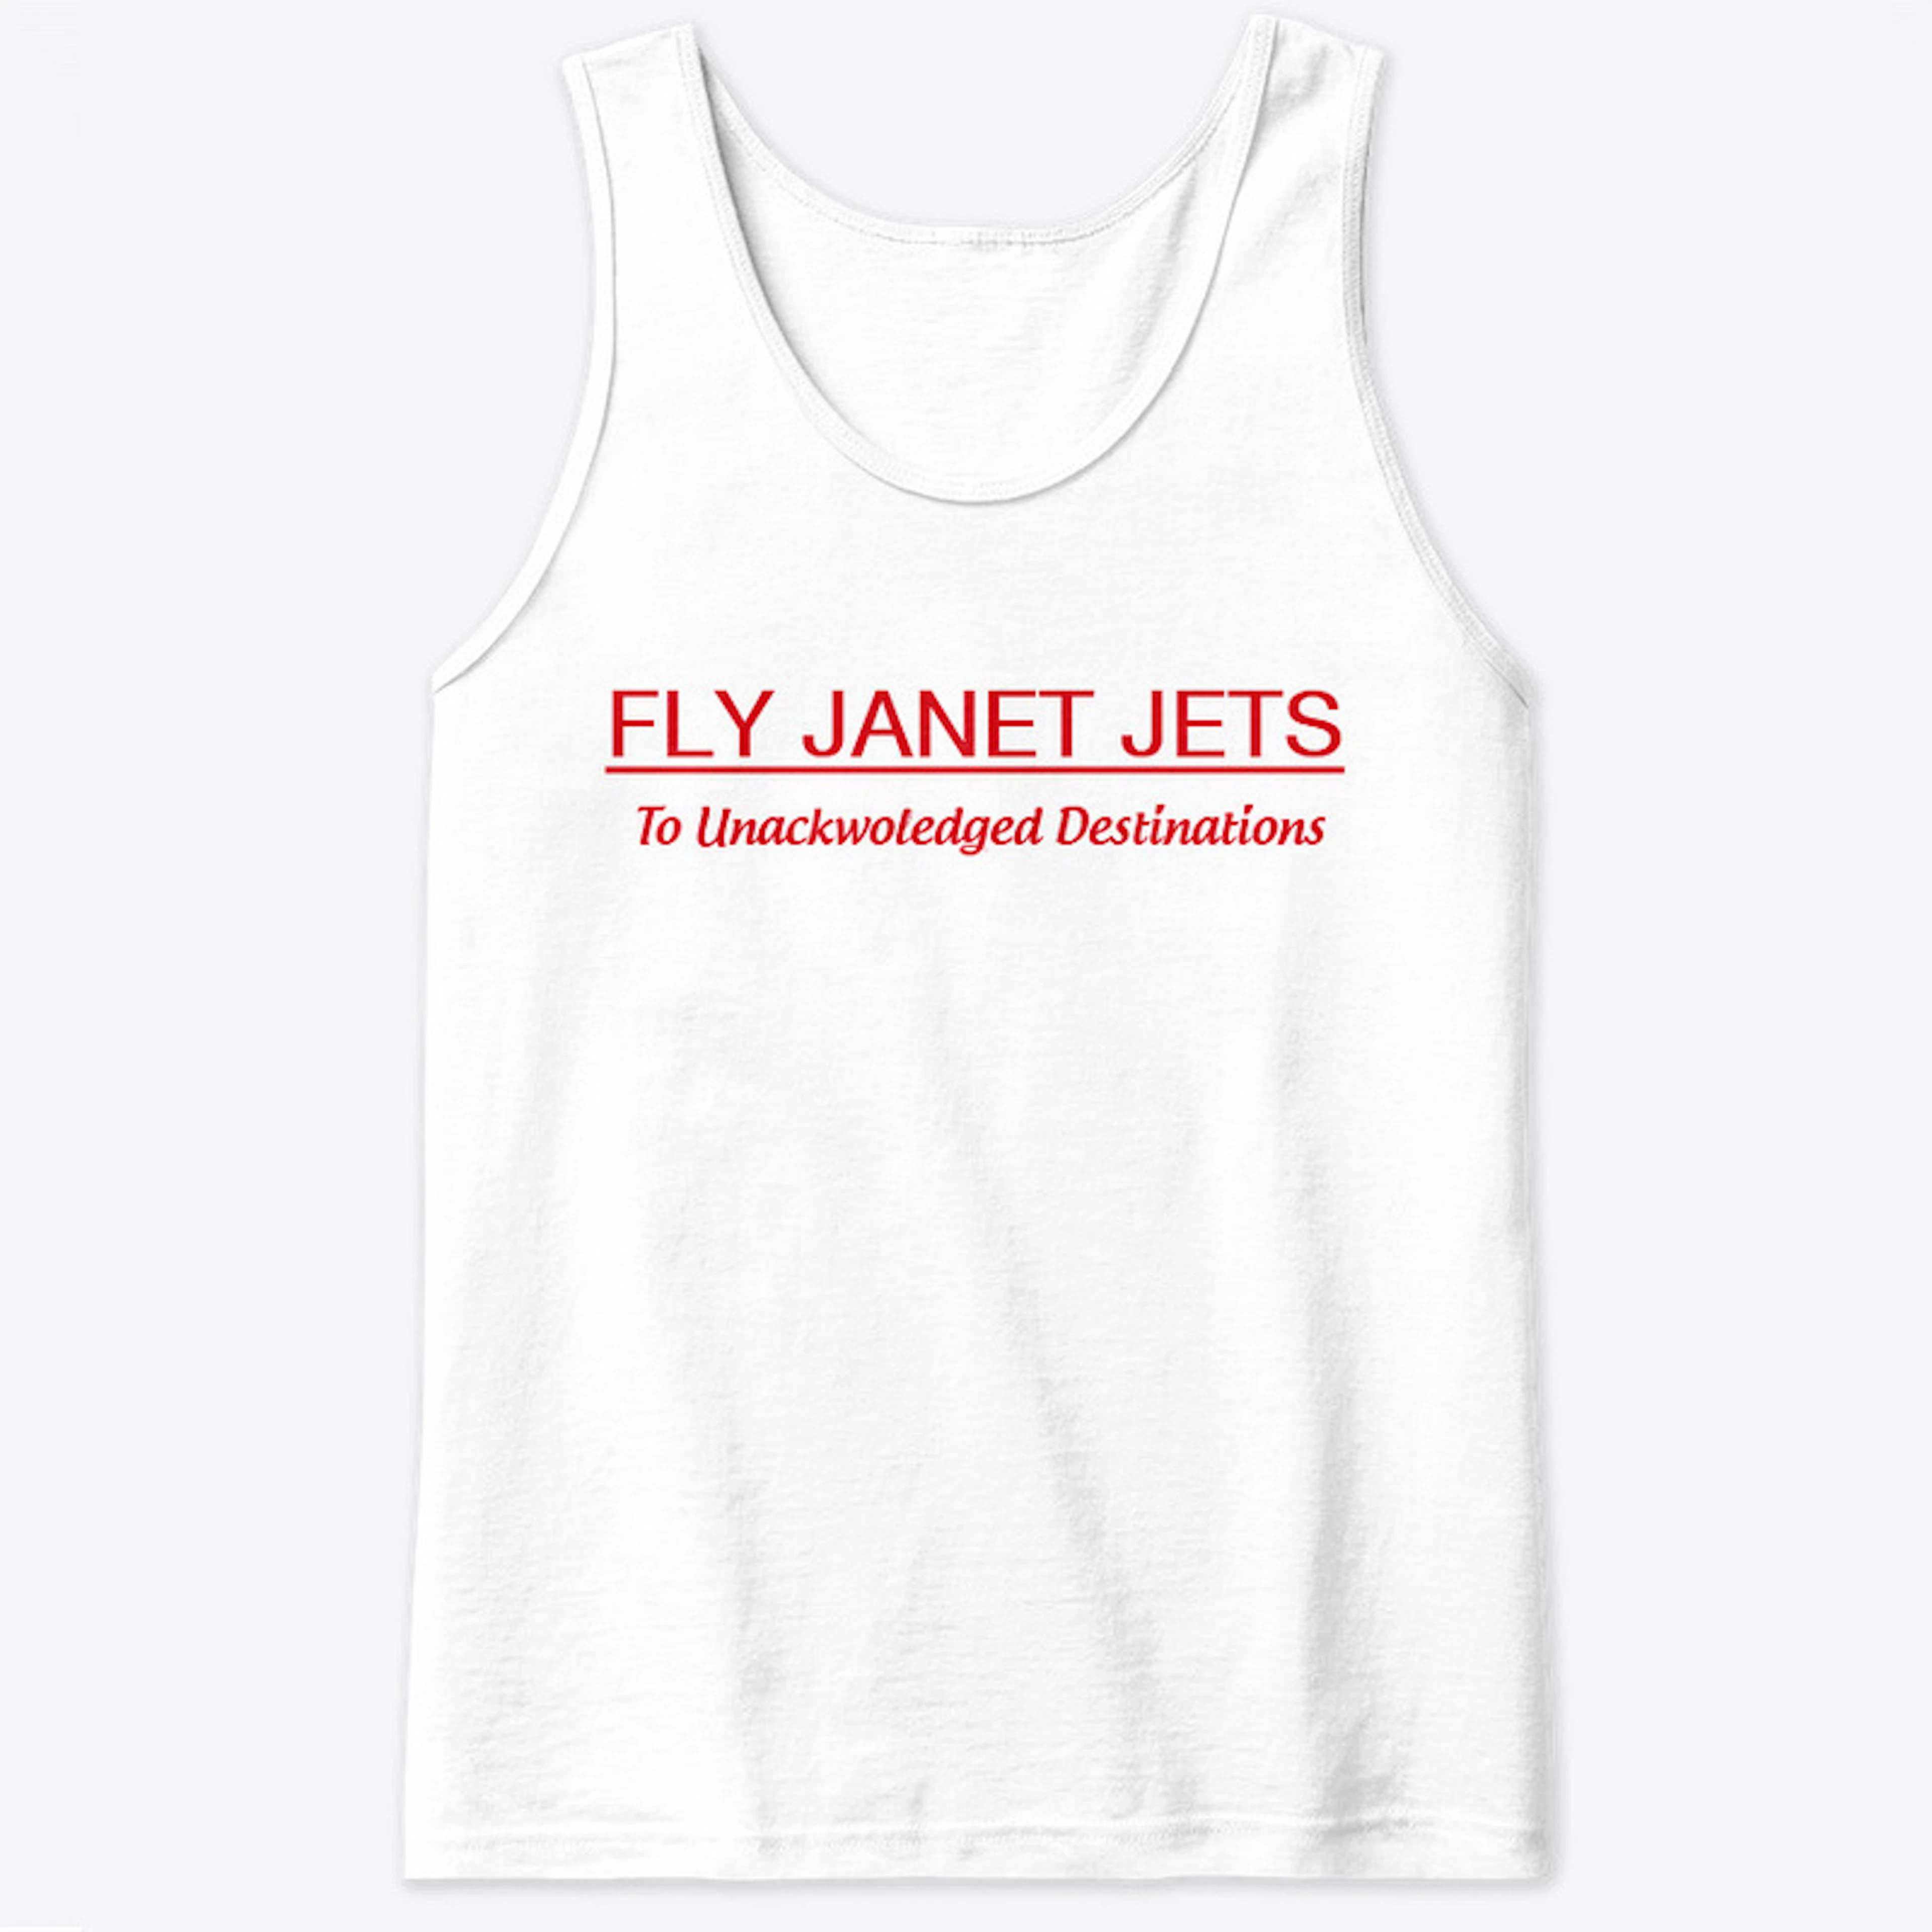 Fly Janet Jets